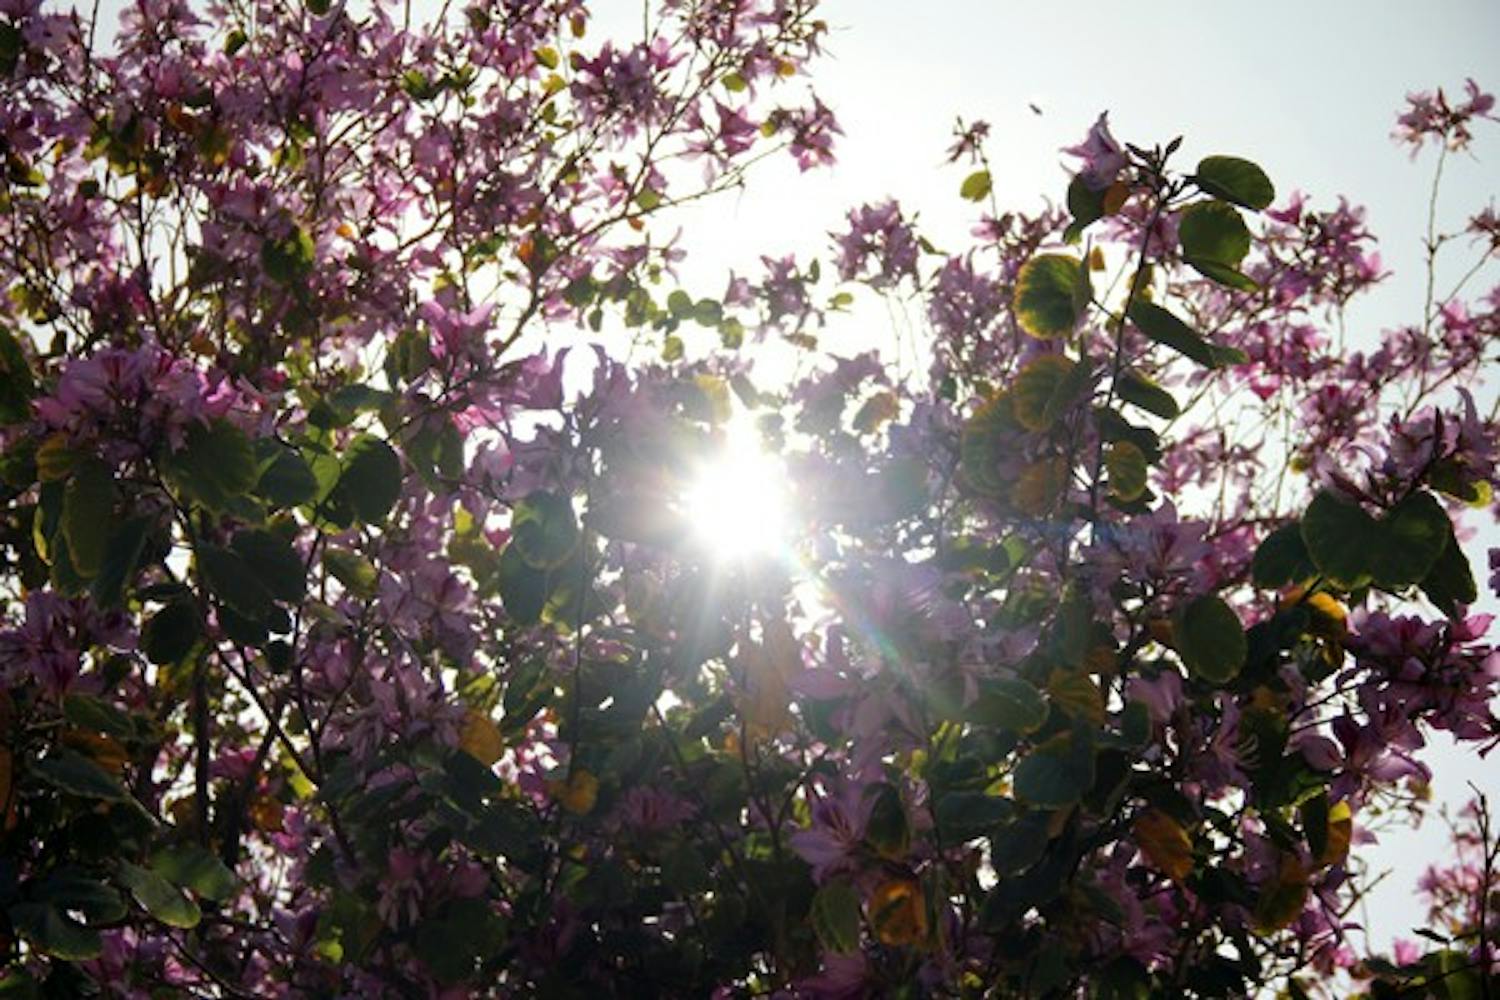 The sun shines through a flowering tree on the Tempe campus Tuesday afternoon. (Photo by Diana Lustig)